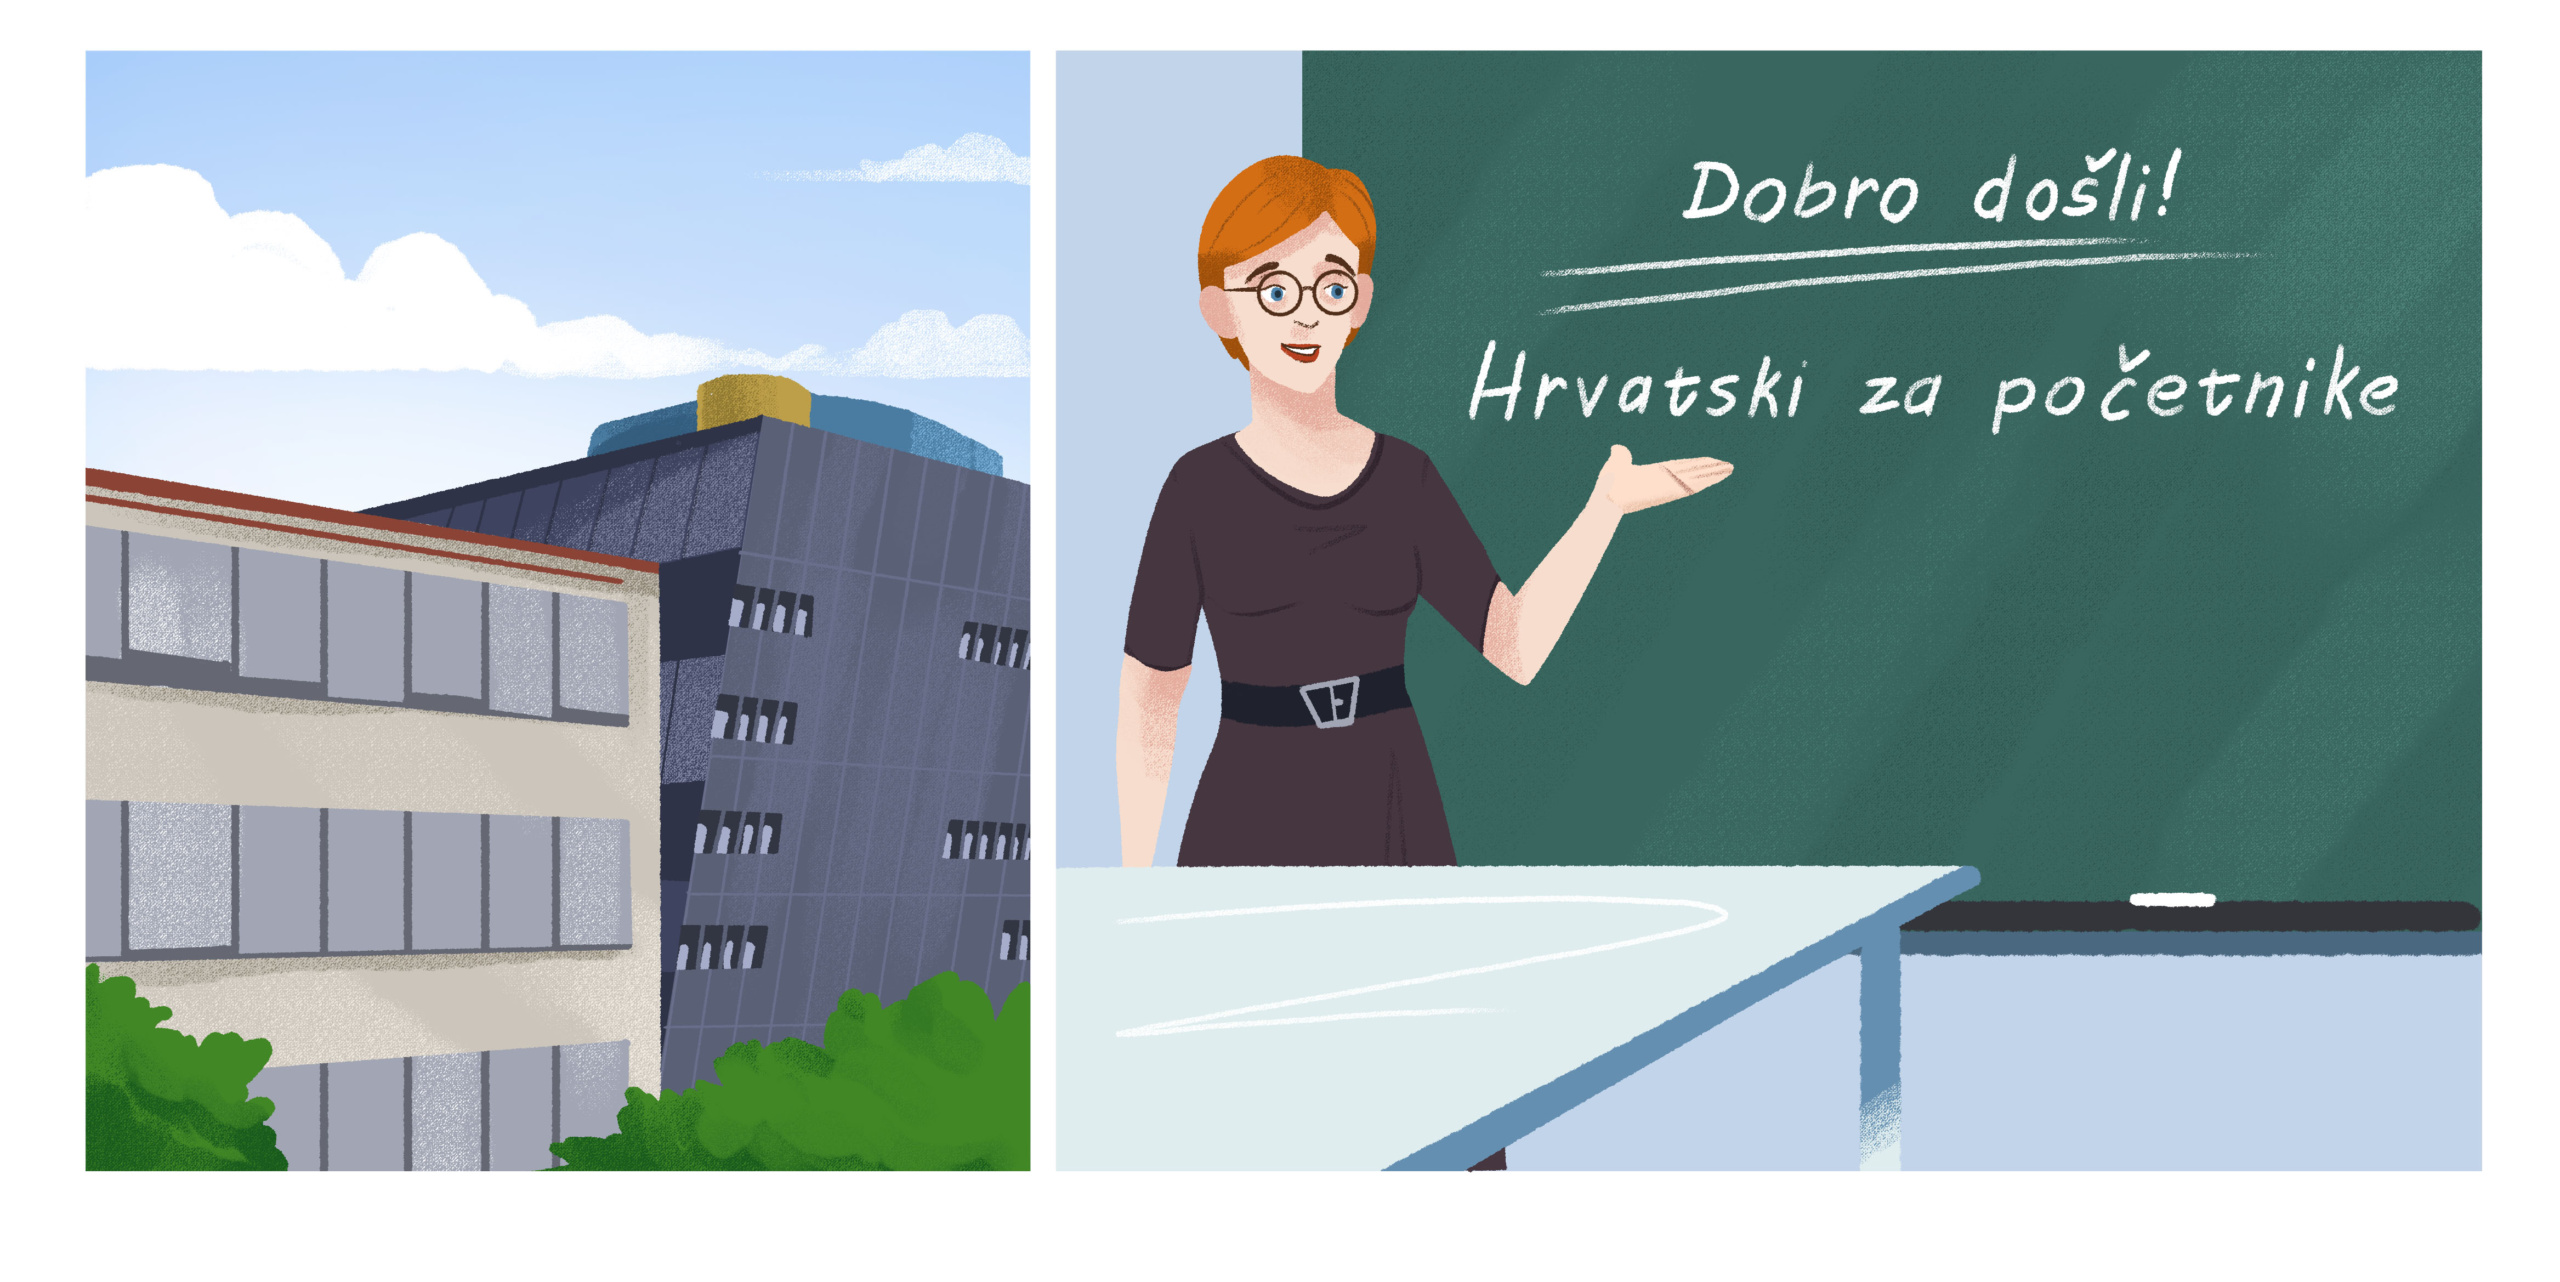 Two cartoon frames: On the left two office buildings with some trees in front, on the right a teacher in front of a green blackboard in a classroom explaining something to the students in front of her.